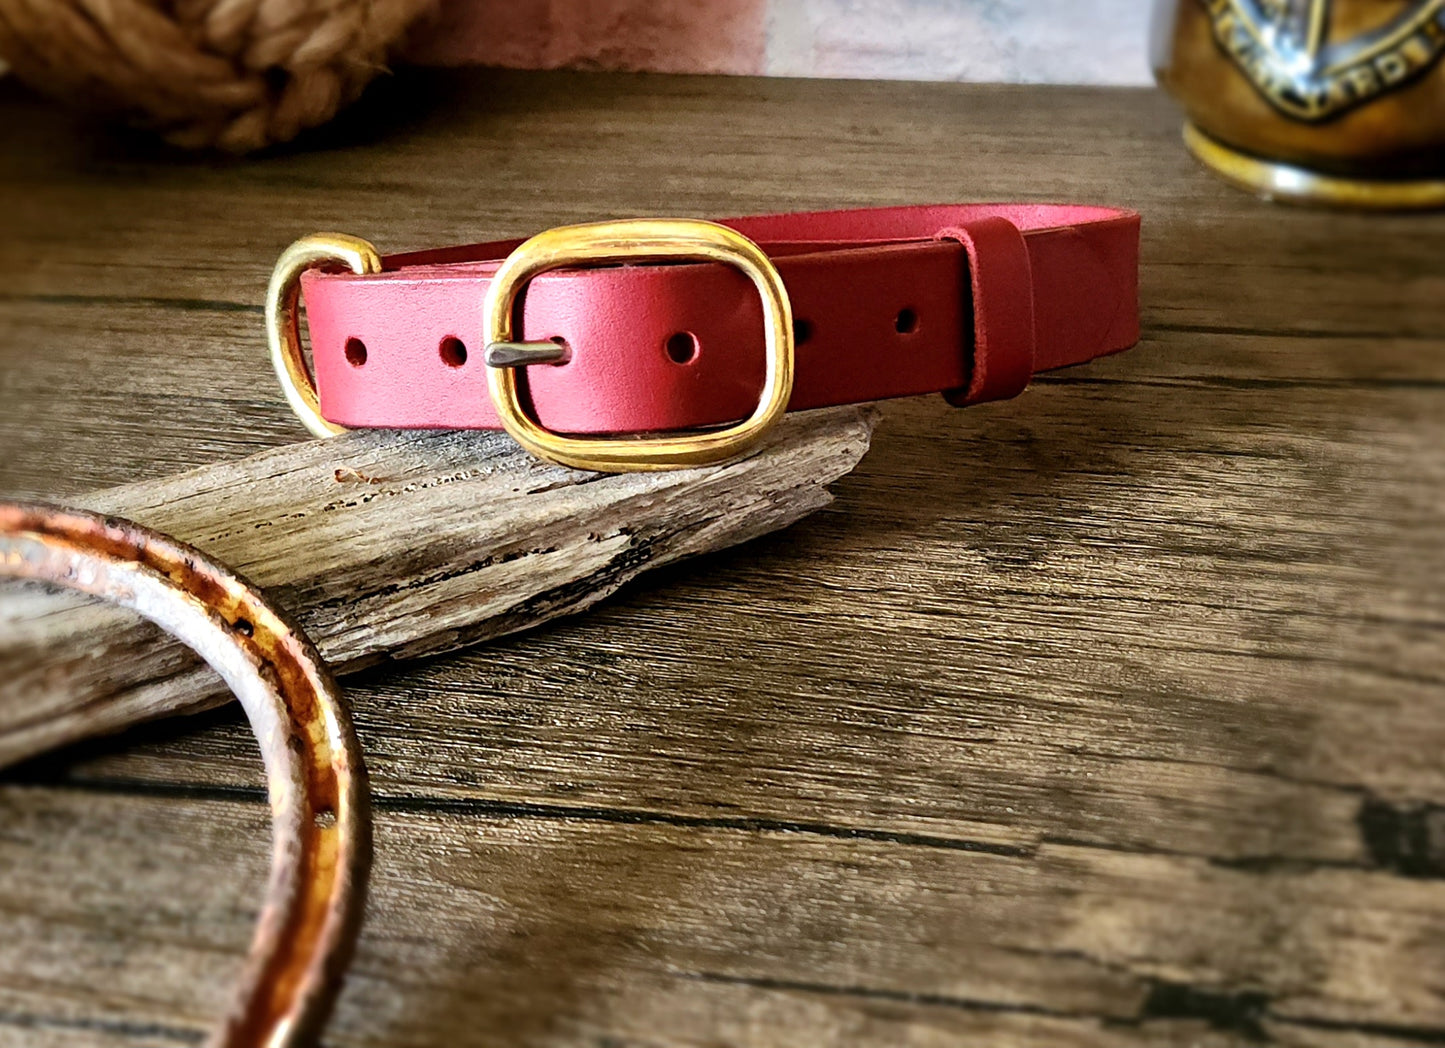 The working or larger, leather dog collar in brass swage buckles